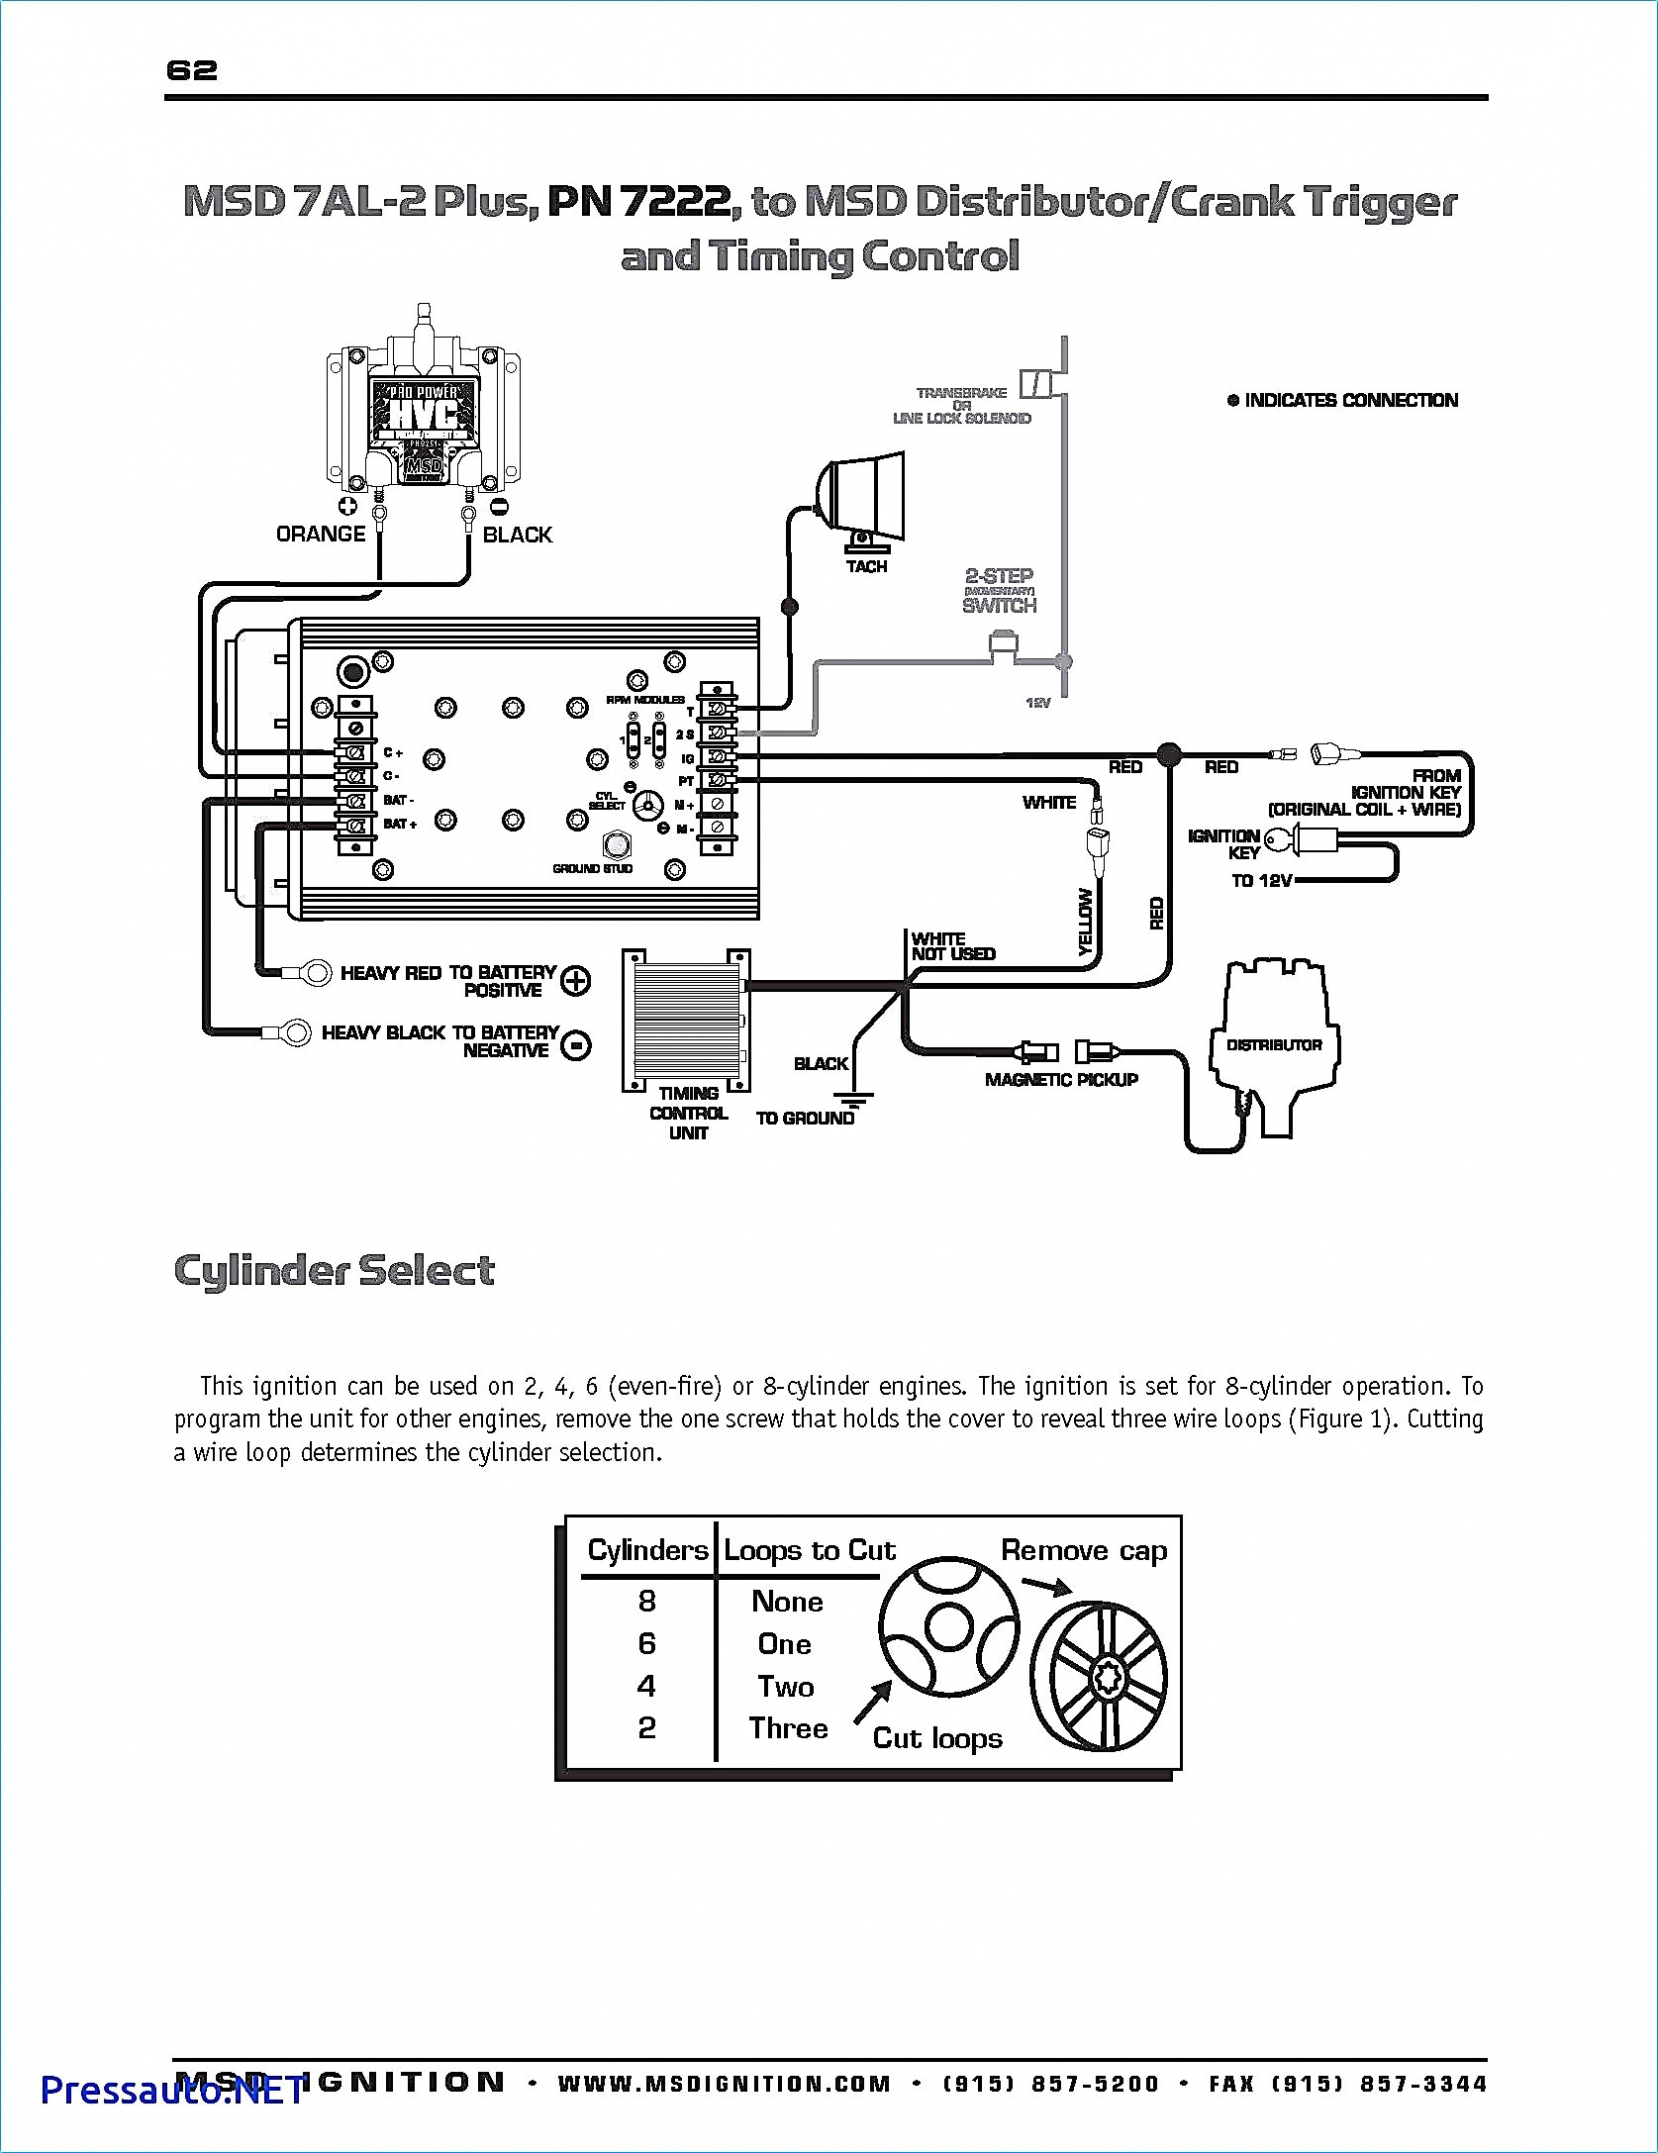 Chevy 350 Wiring Diagram To Distributor - All Wiring Diagram - Chevy 350 Wiring Diagram To Distributor